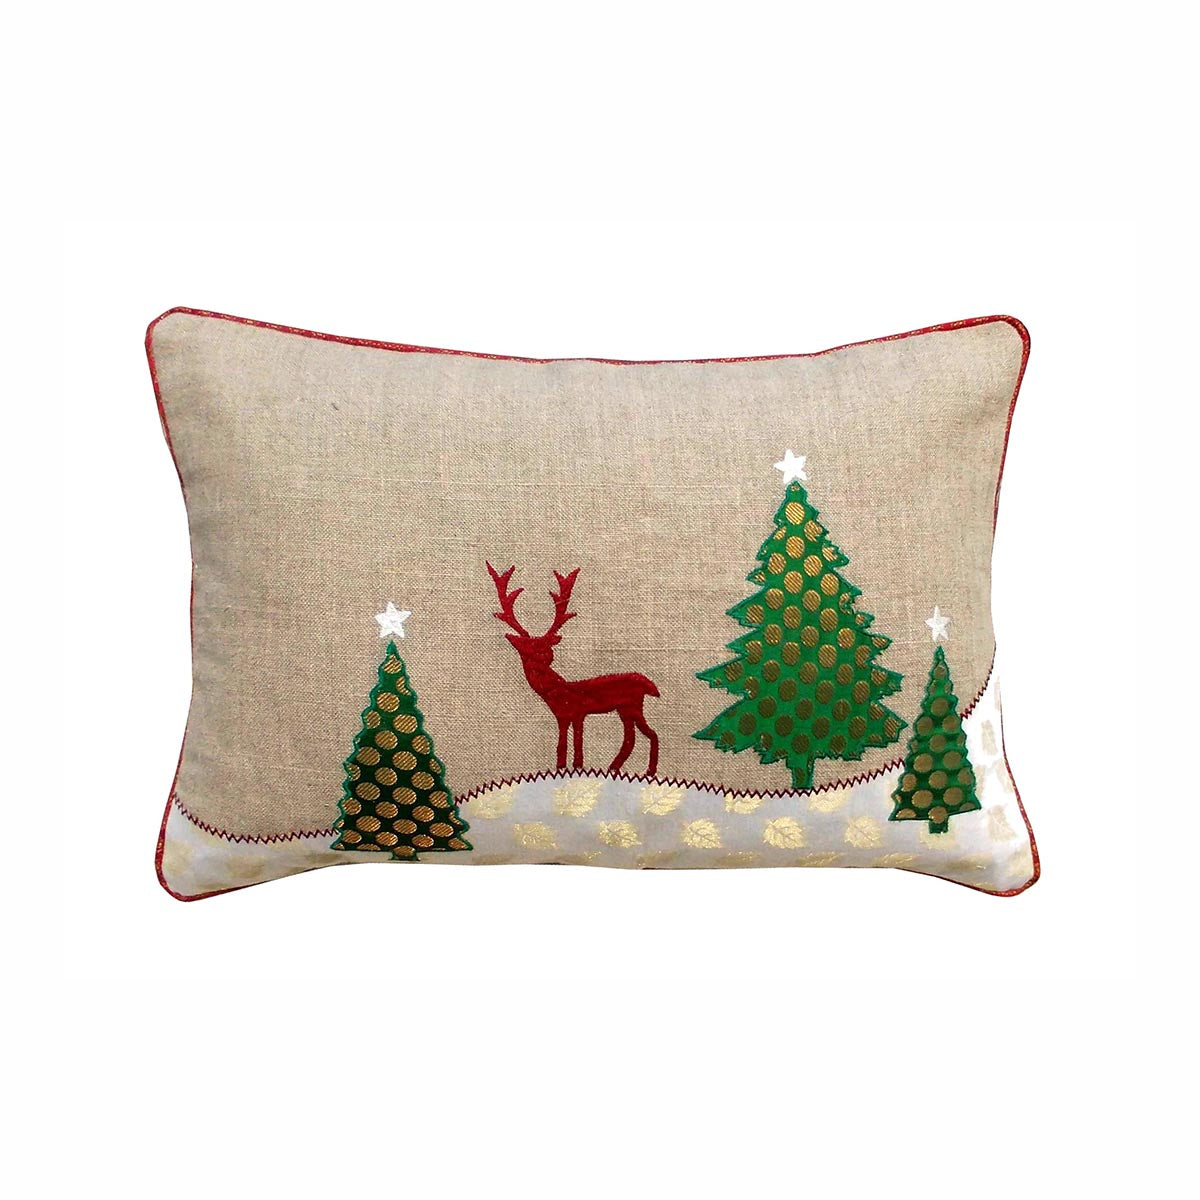 Christmas tree with reindeer cushion cover, linen fabric pillow cover